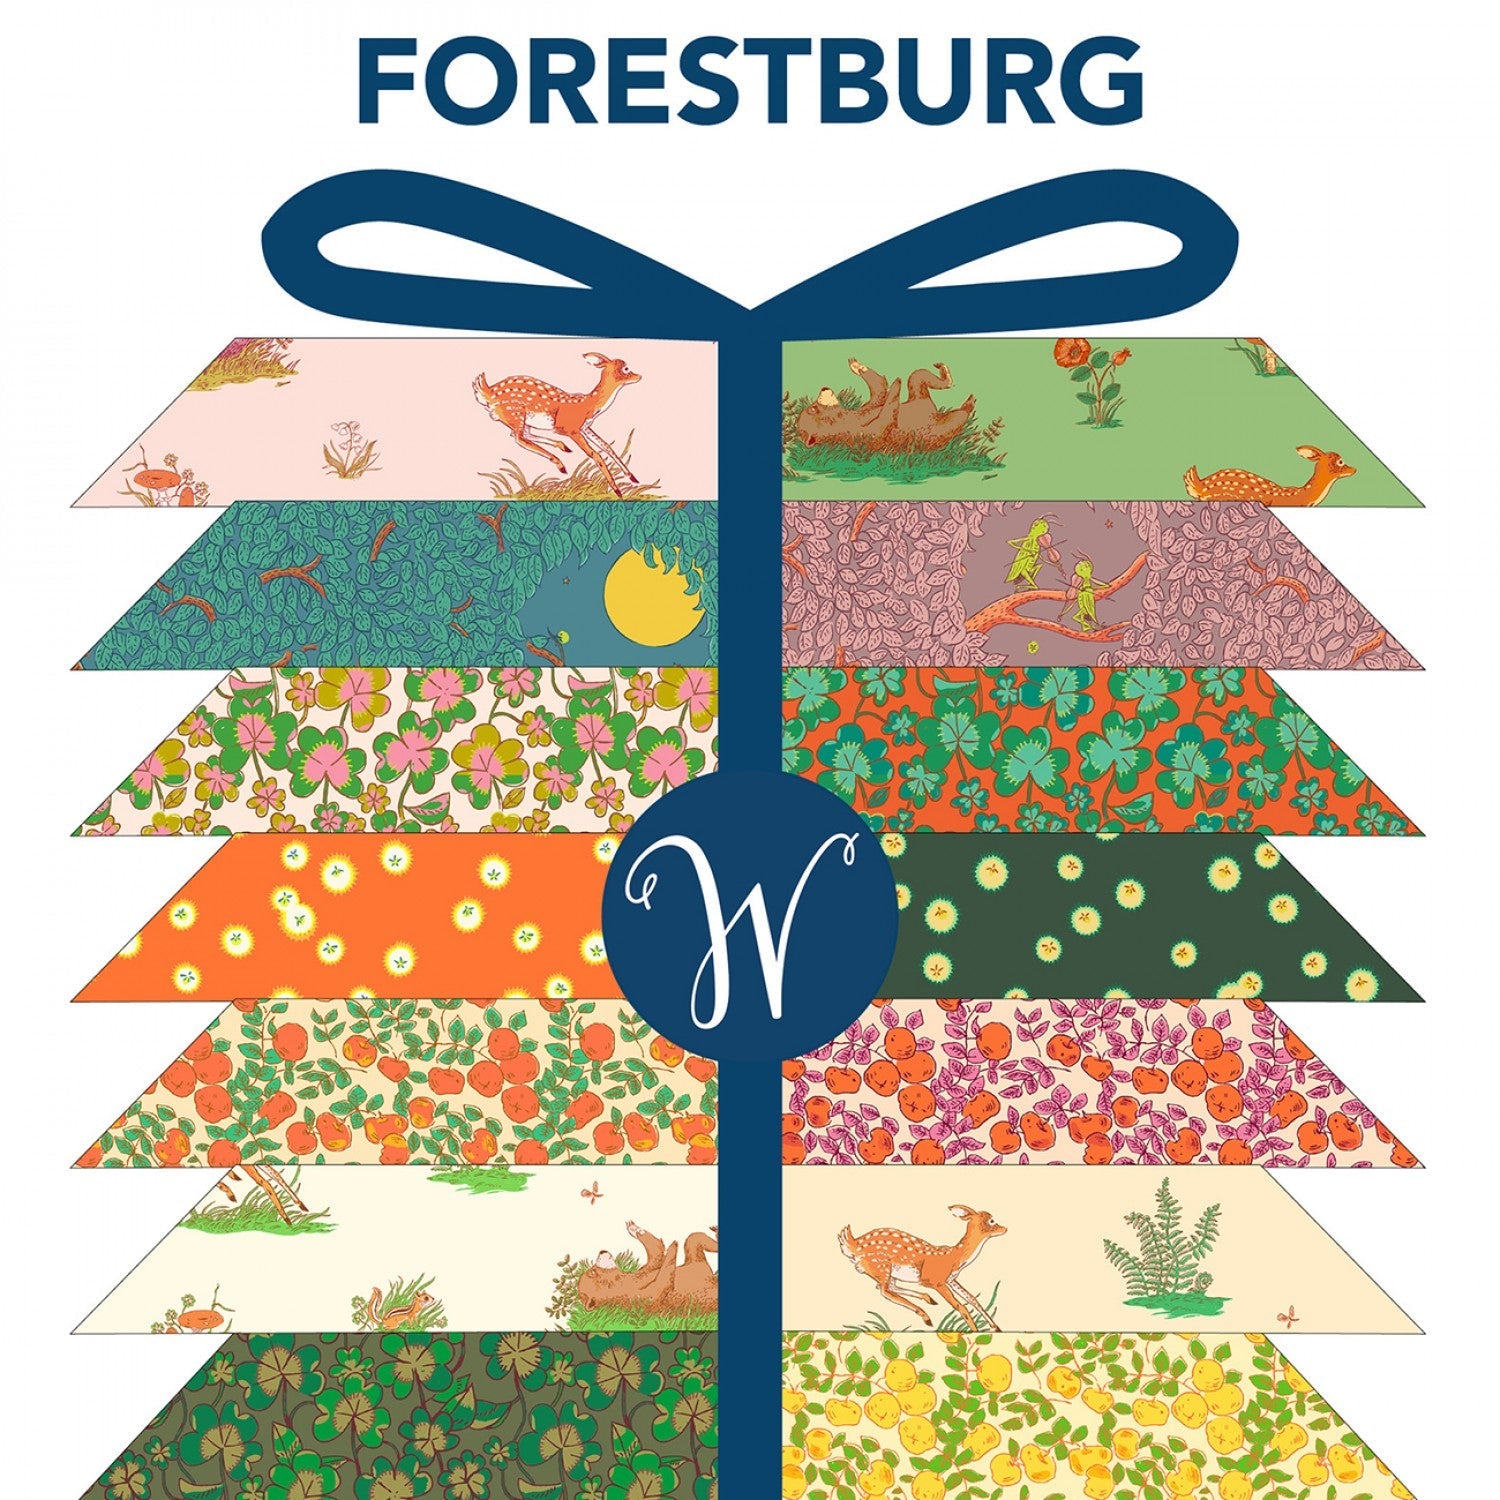 This HALF YARD BUNDLE contains 27 quilting cotton prints from Forestburgh by Heather Ross for Windham Fabrics.  Manufacturer: Windham Fabrics Designer: Heather Ross Collection: Forestburgh Material: 100% Cotton Weight: Quilting 